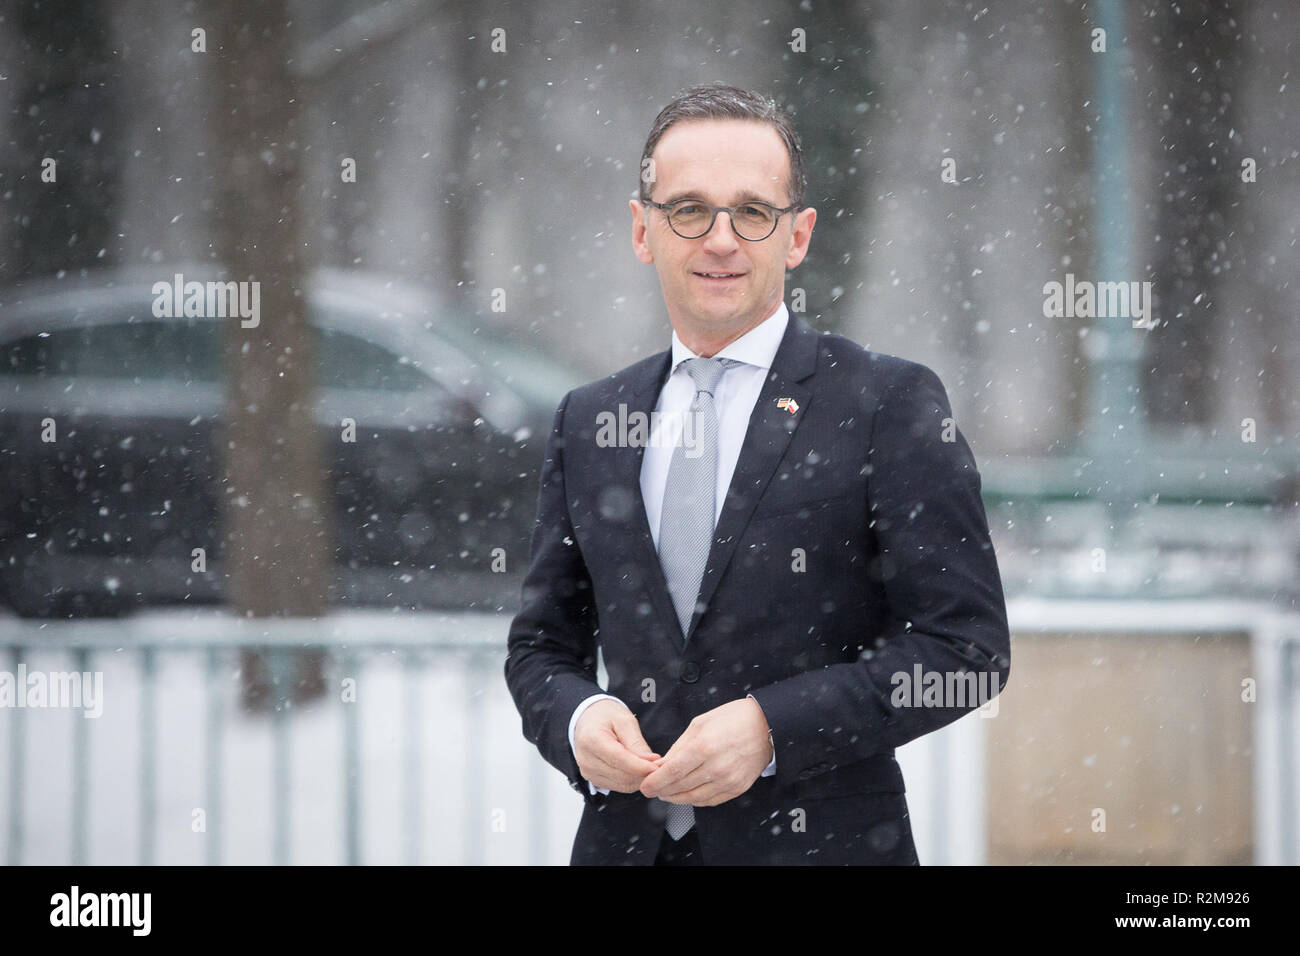 German Minister of Foreign Affairs Heiko Maas before the meeting with Polish Minister of Foreign Affairs Jacek Czaputowicz  at Lazienki Palace in Warsaw, Poland on 16 March 2018 Stock Photo